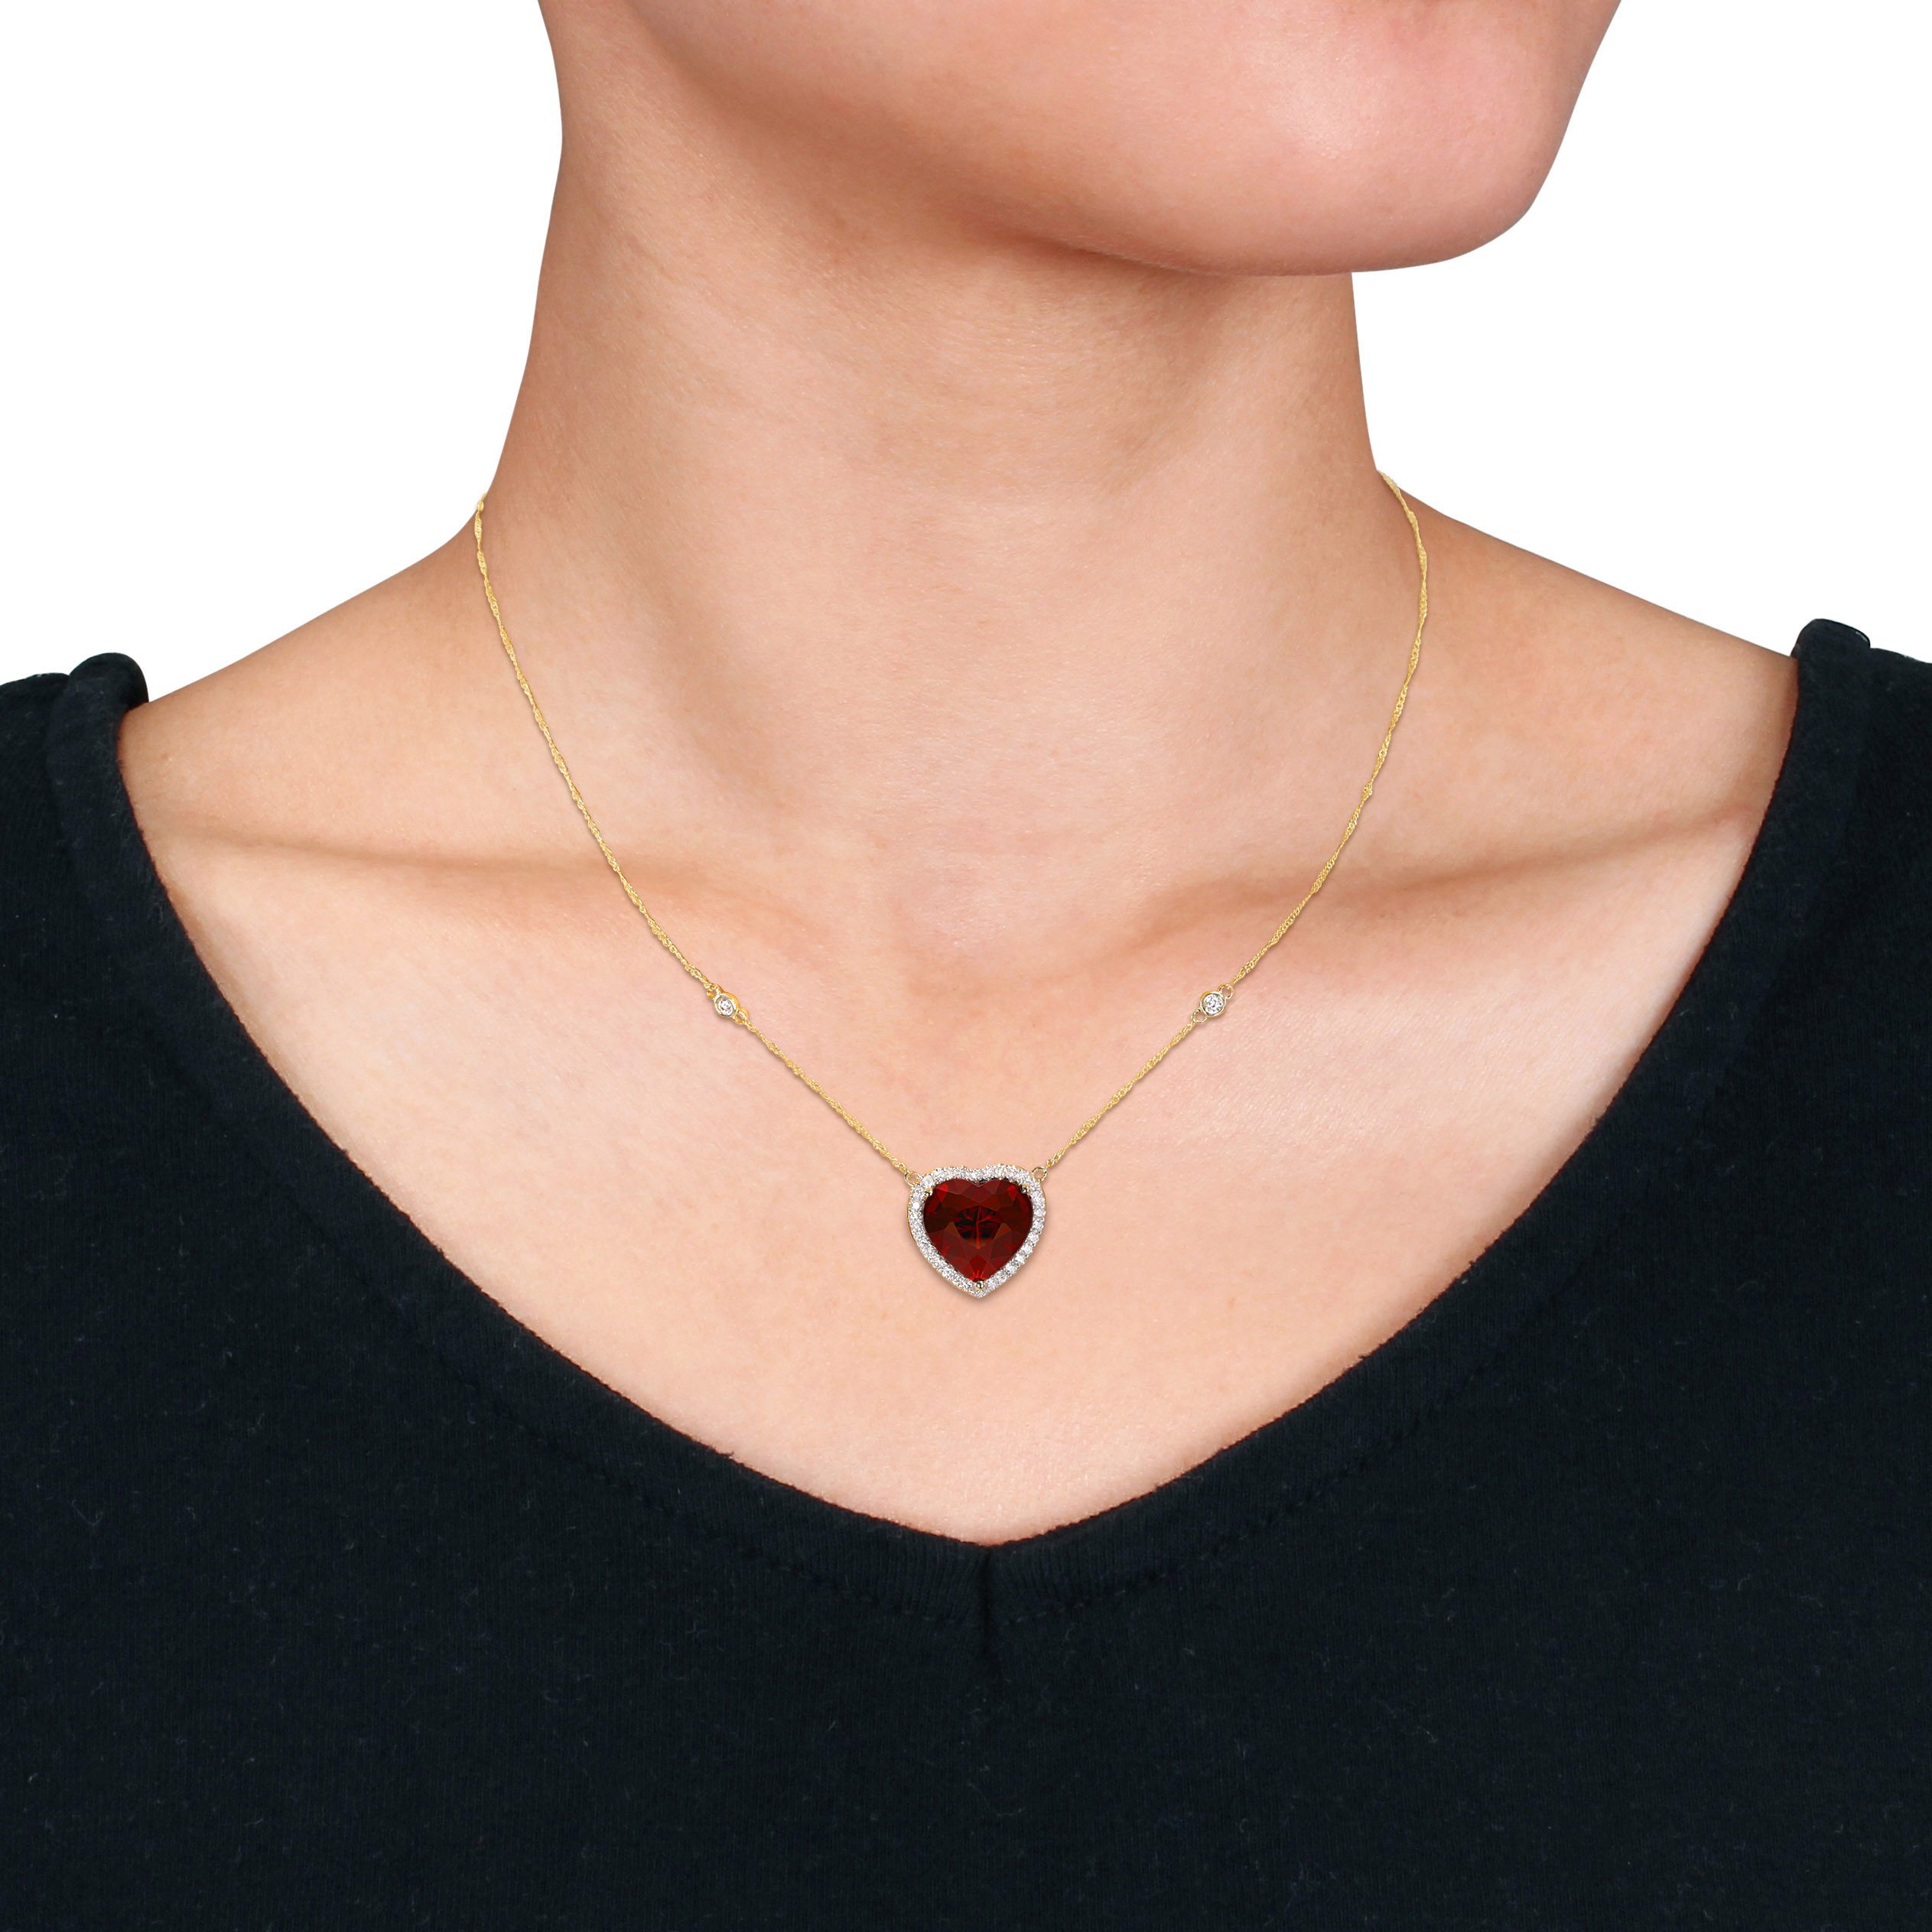 10 1/3 CT TGW Heart-Cut Garnet and 3/8ct TDW Diamond Halo Necklace in 14k Yellow Gold - 16 in.